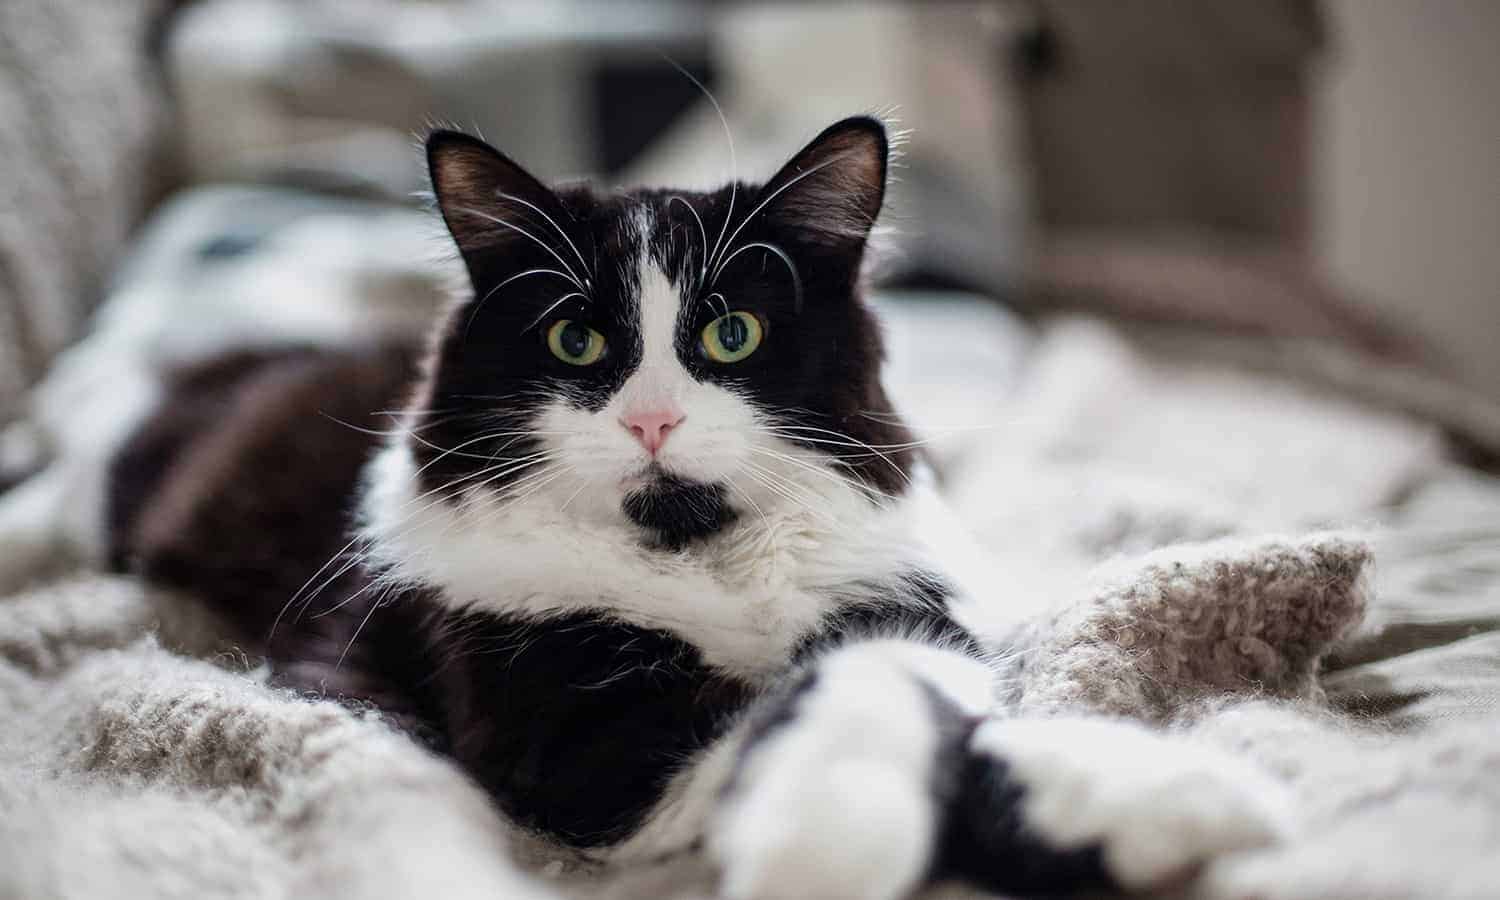 A black and white cat with its paws crossed